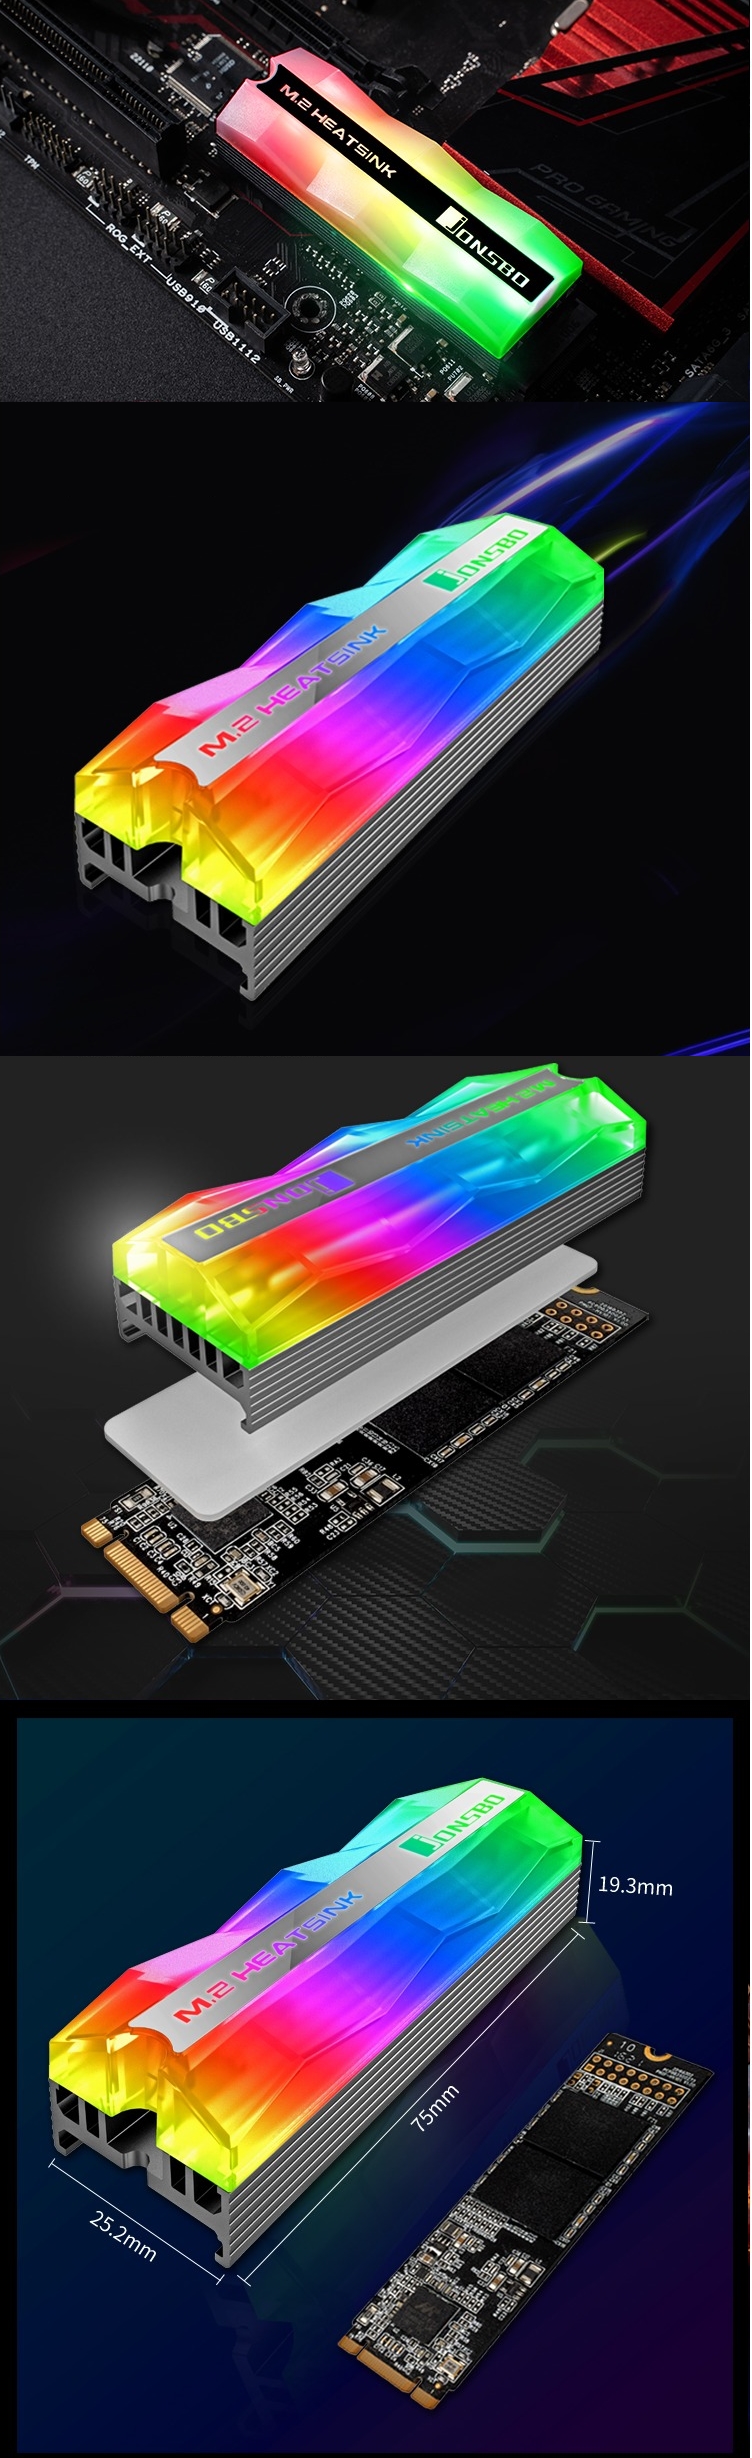 A large marketing image providing additional information about the product Jonsbo Aluminium M.2 Solid State Drive RGB Heatsink - Grey - Additional alt info not provided